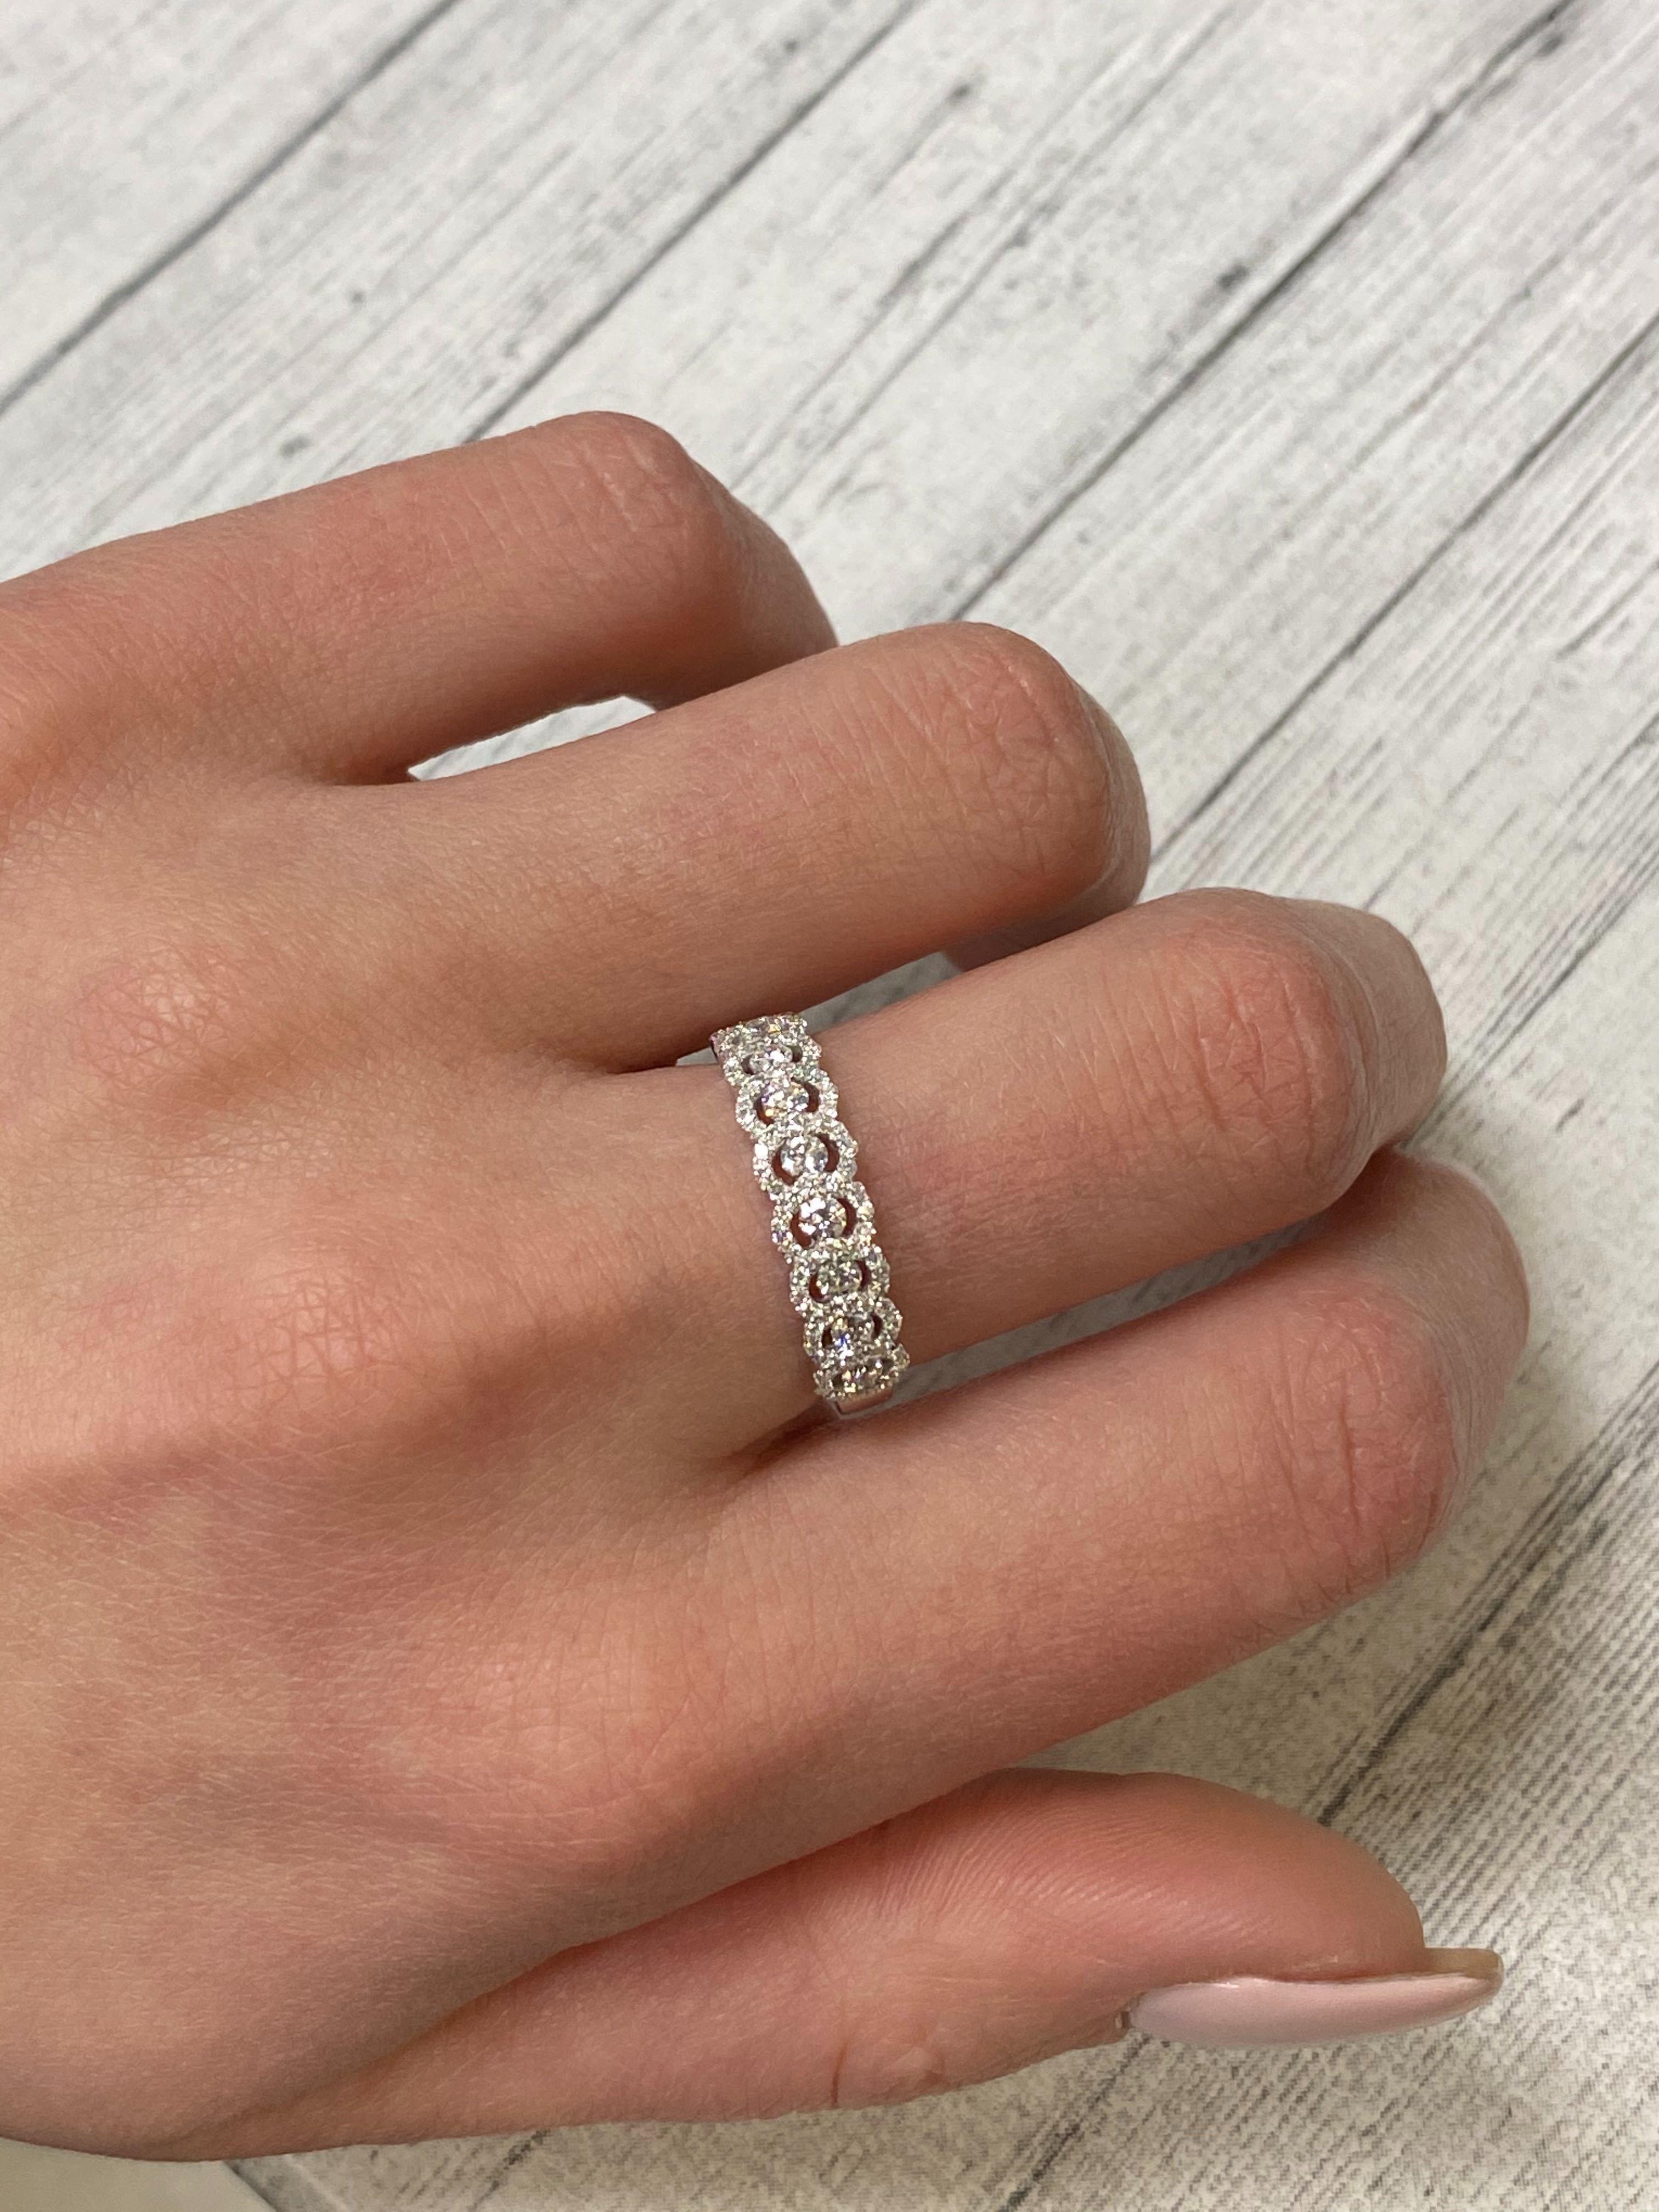 Rachel Koen Diamond Halo Half Way Band 18K White Gold 0.70 Cttw In New Condition For Sale In New York, NY